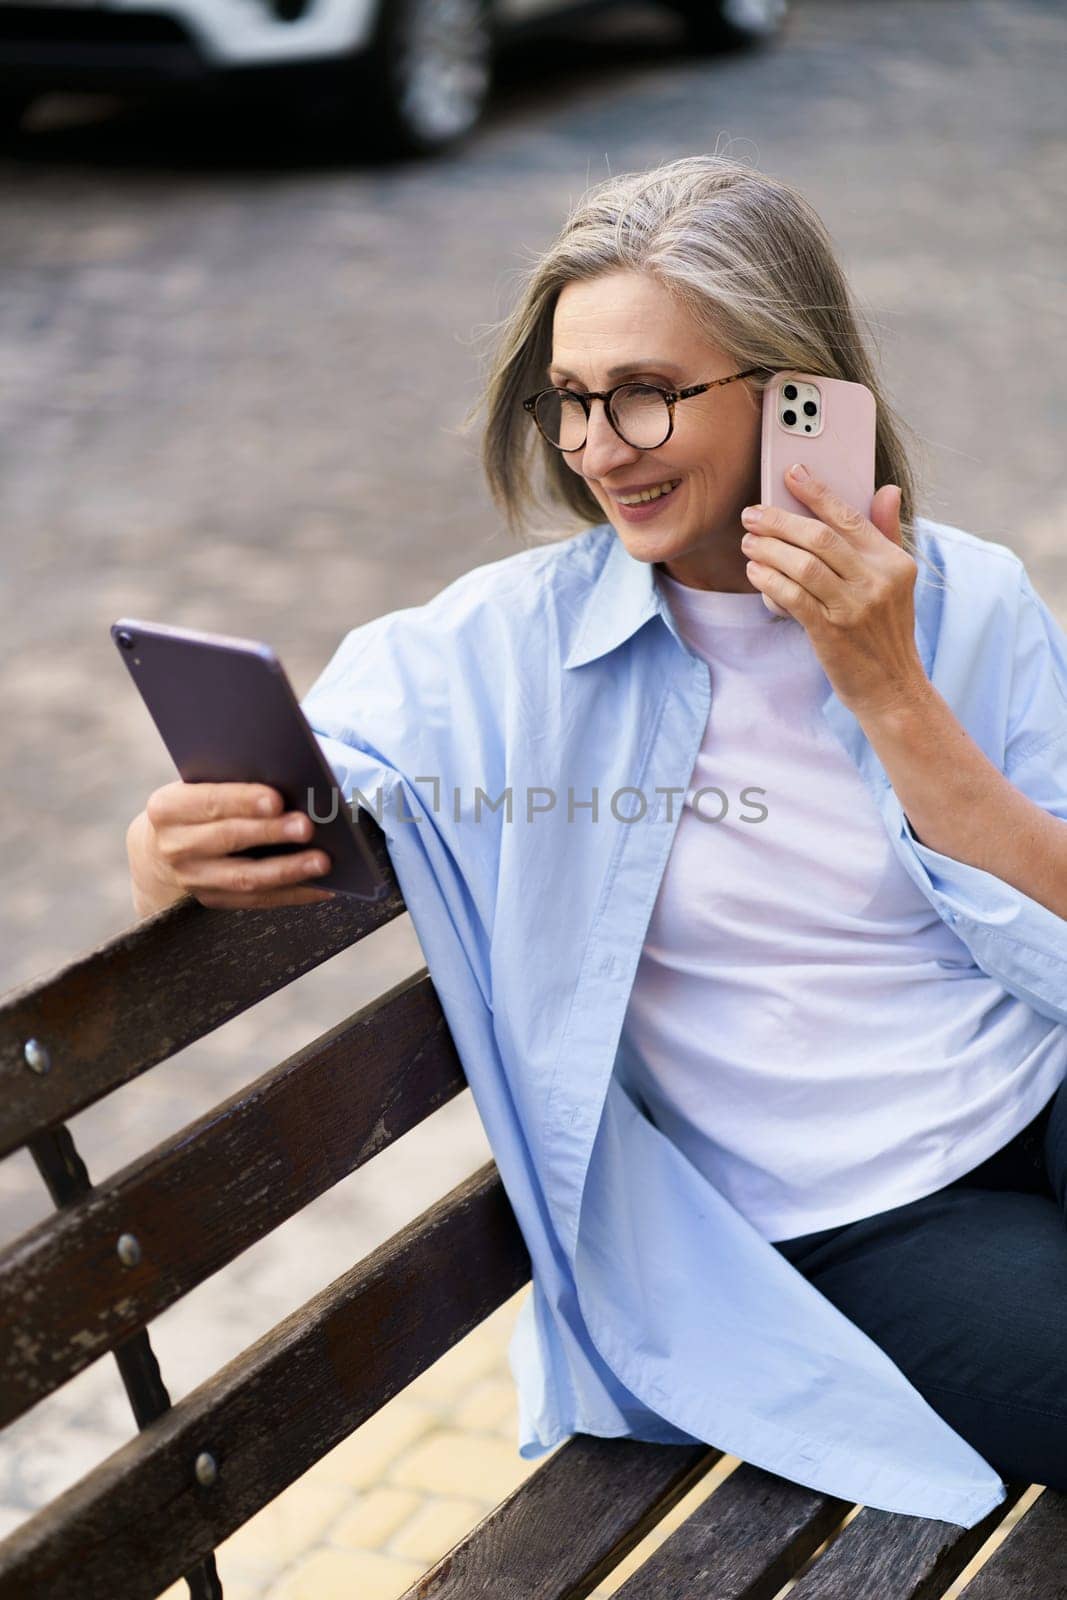 Happy senior woman is multitasking with a tablet PC and phone call on a busy city street. She showcases modern technology and active lifestyle in the elderly population. High quality photo